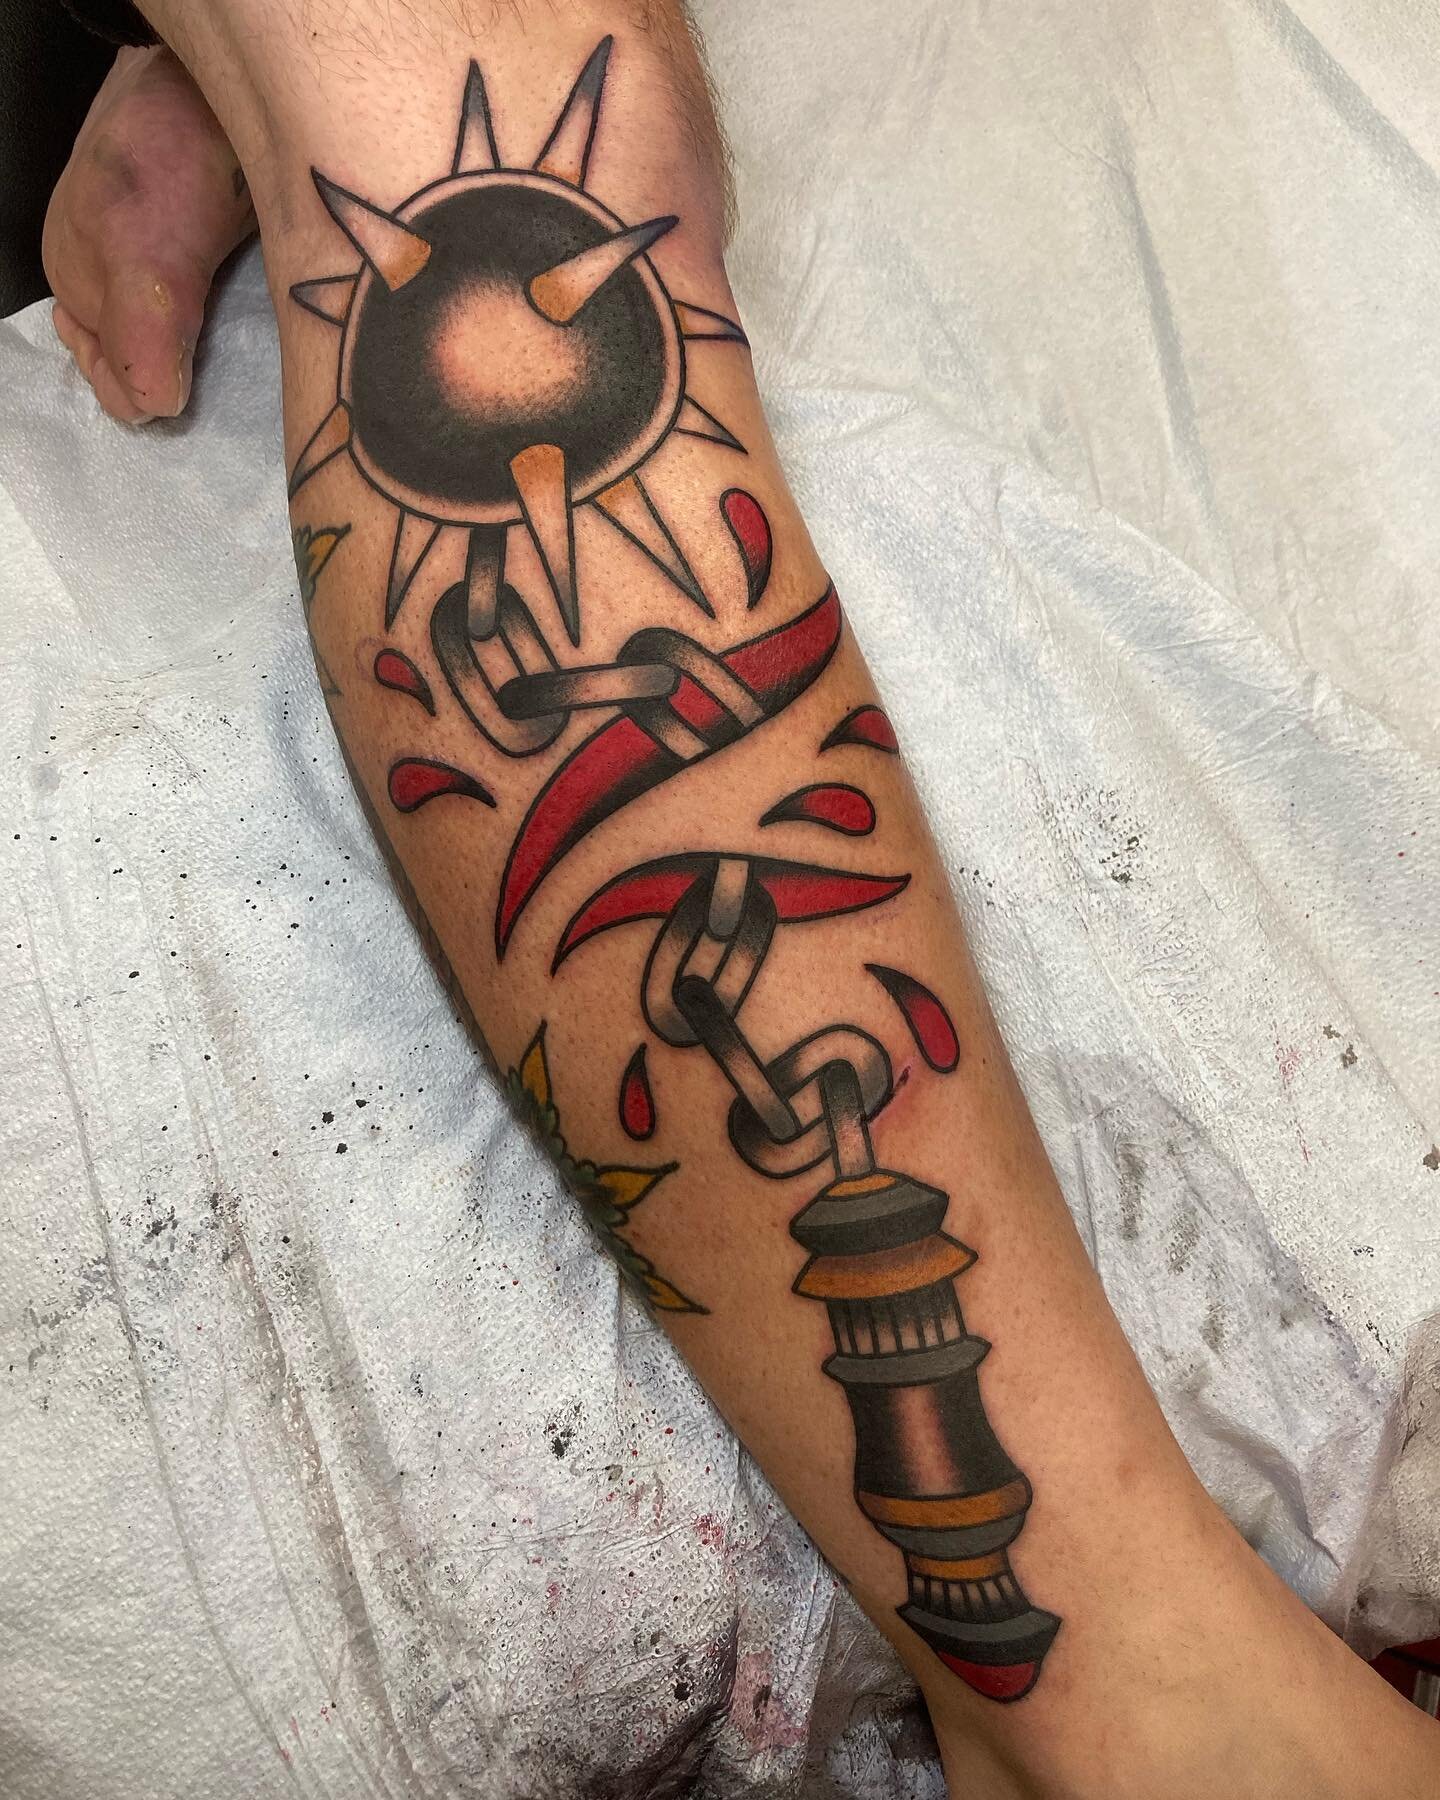 Great way to cover half your leg in a couple hours, thanks igor! @hotlinetattoo 

#capecod #hotlinetattoo #capecodtattoo